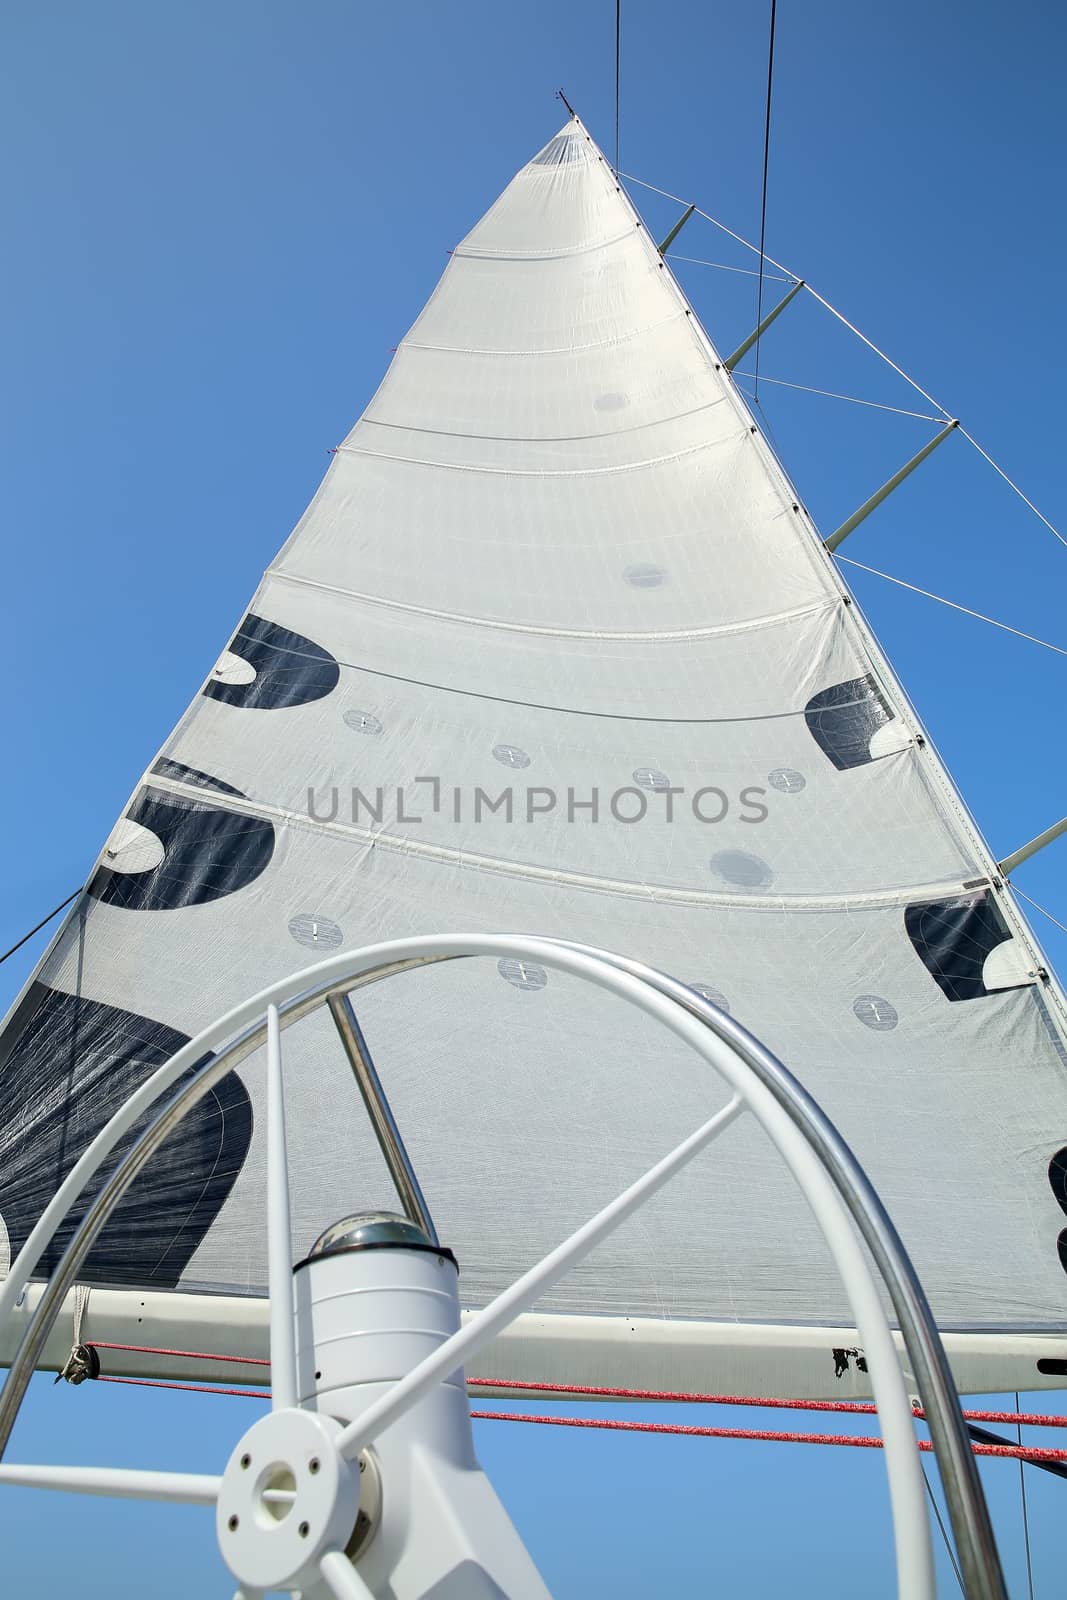 The mast, sail and rudder of the yacht. Wind in the sails by sergasx